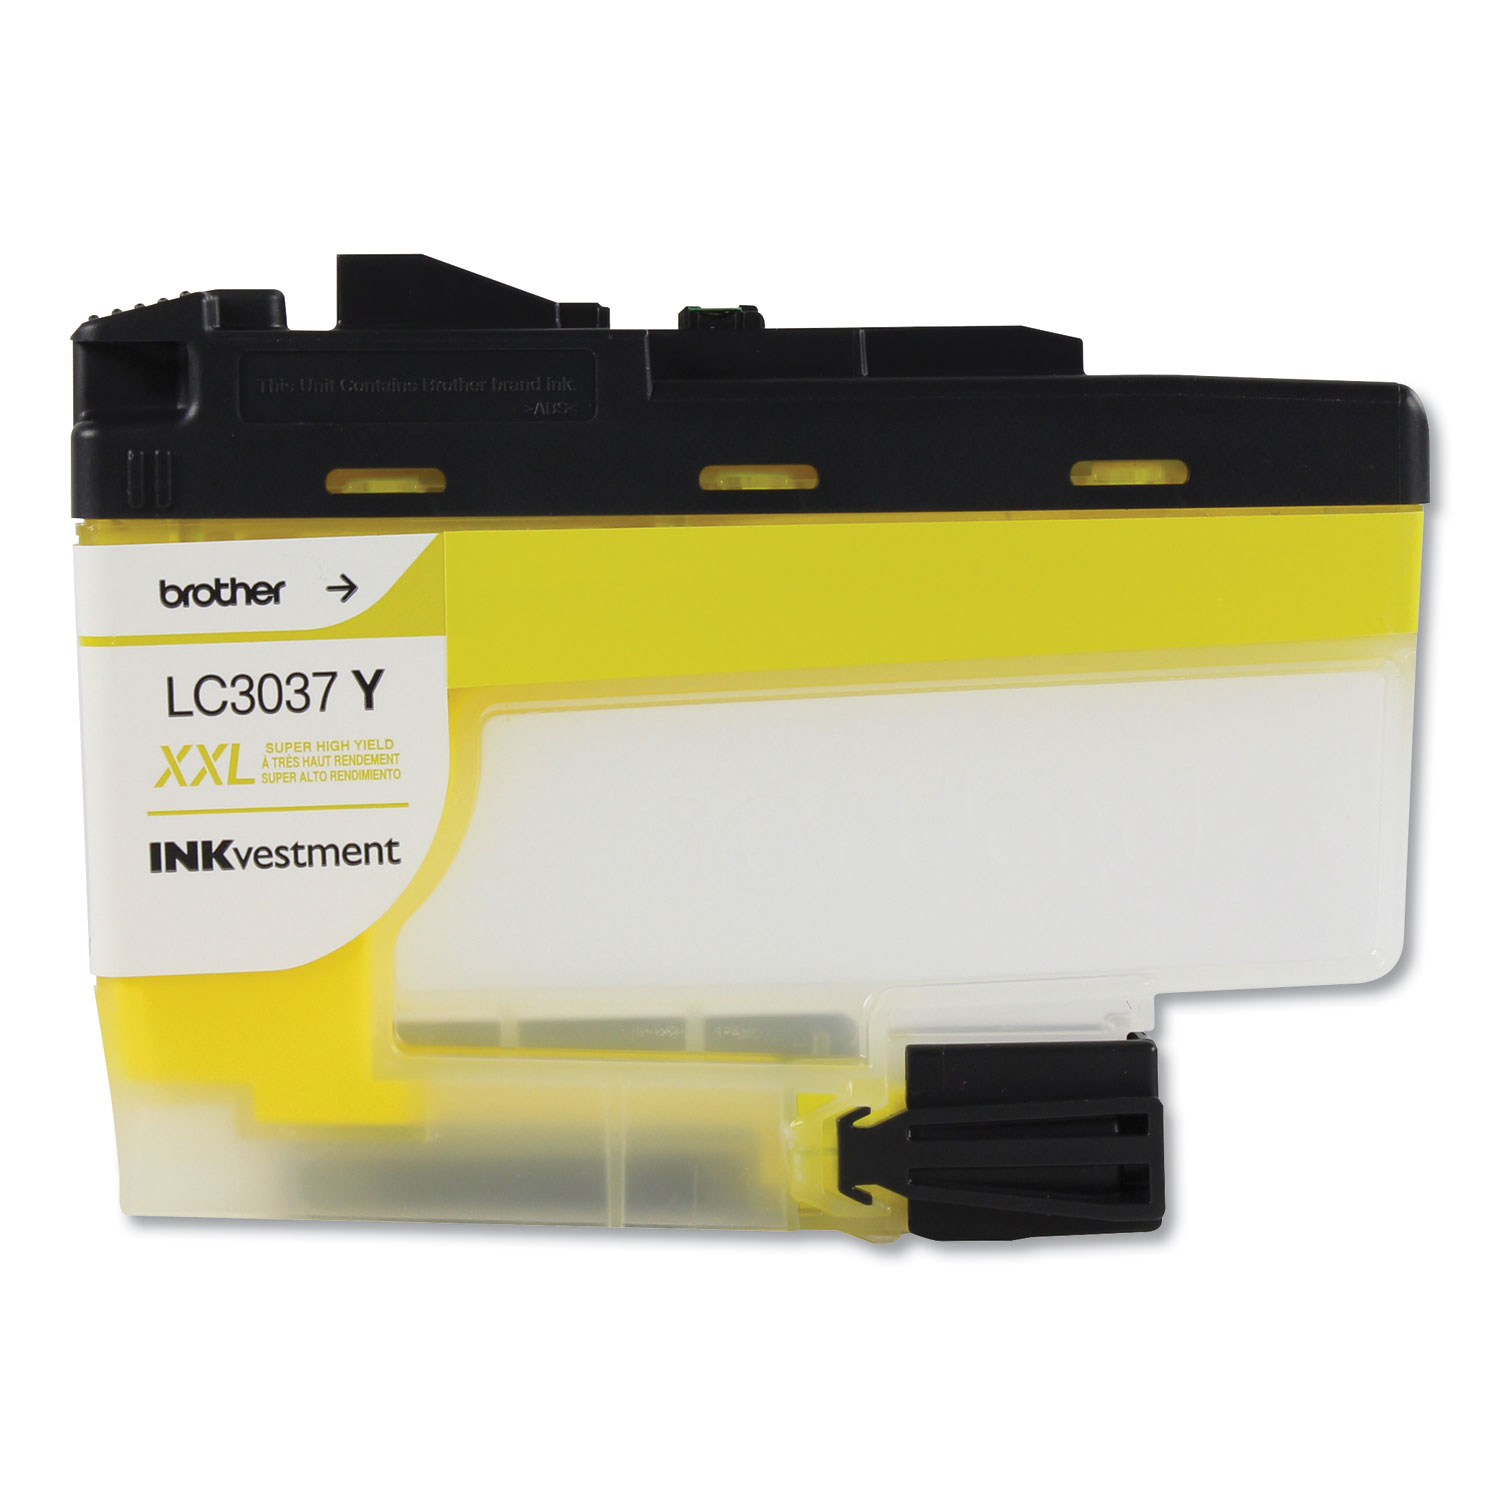  Brother LC3037Y LC3037Y INKvestment Super High-Yield Ink, 1500 Page-Yield, Yellow (BRTLC3037Y) 